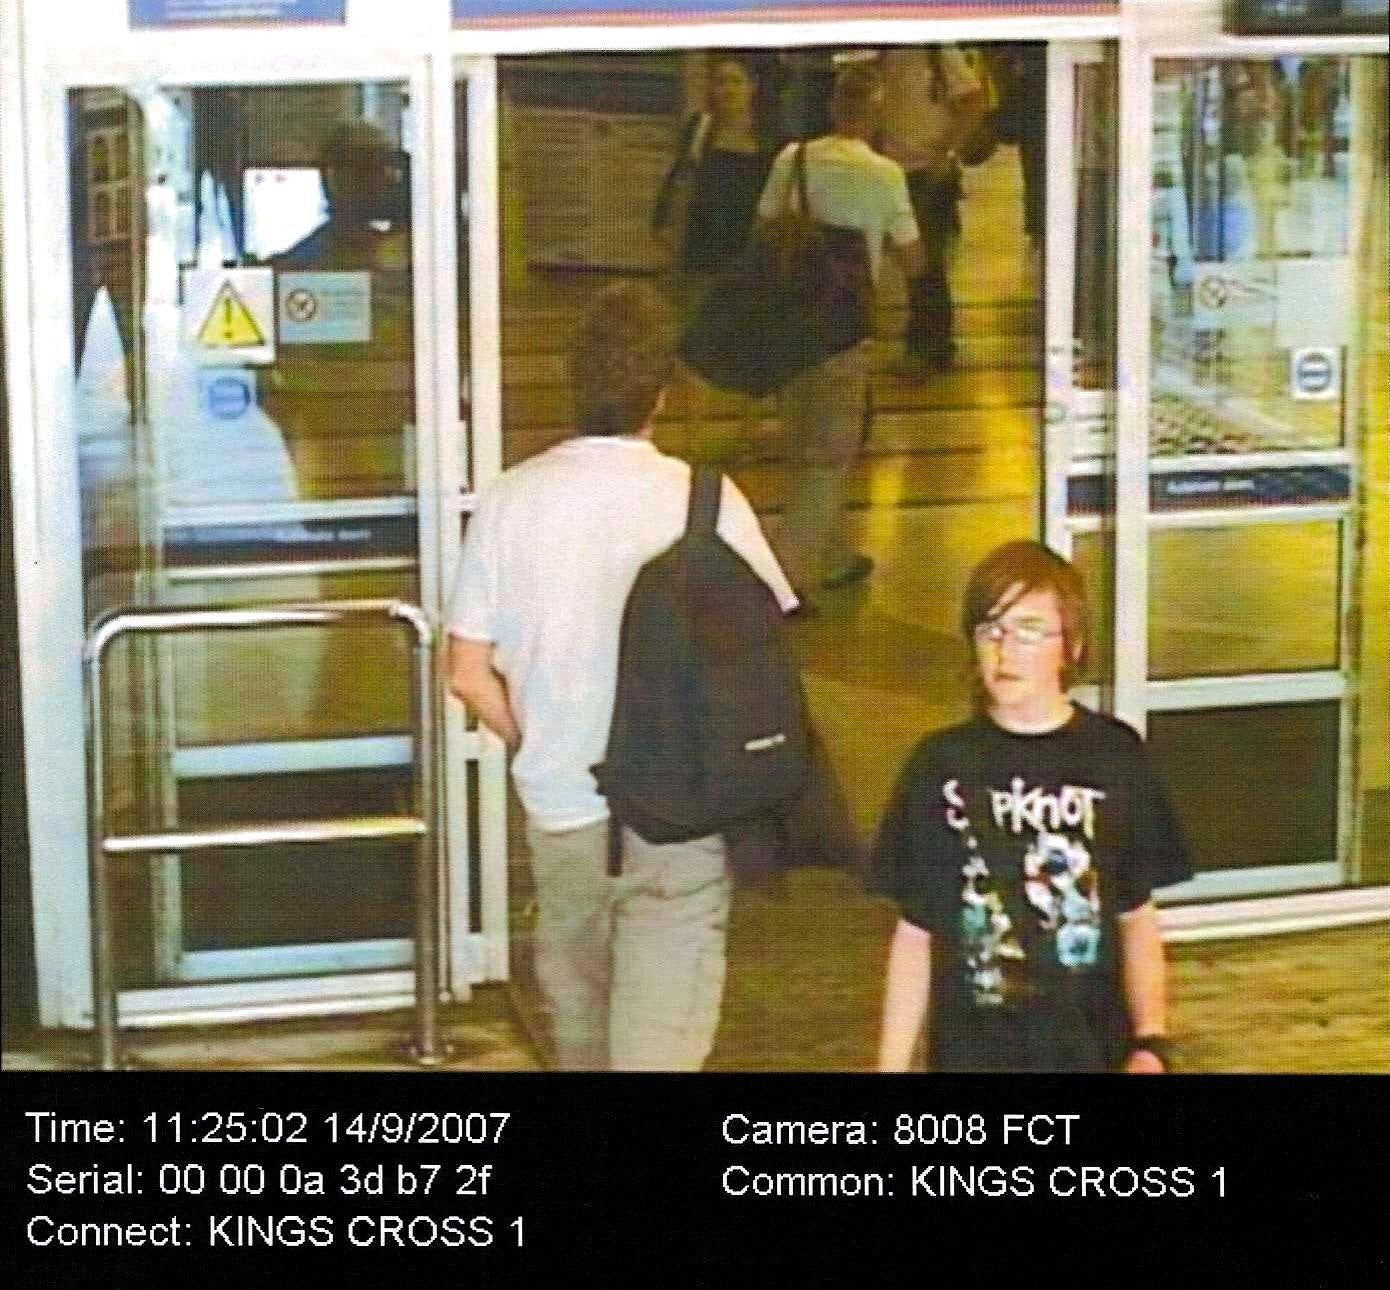 CCTV footage showed 14-year-old Andrew Gosden at Kings Cross Station on September 14 2007. (South Yorkshire Police/PA)